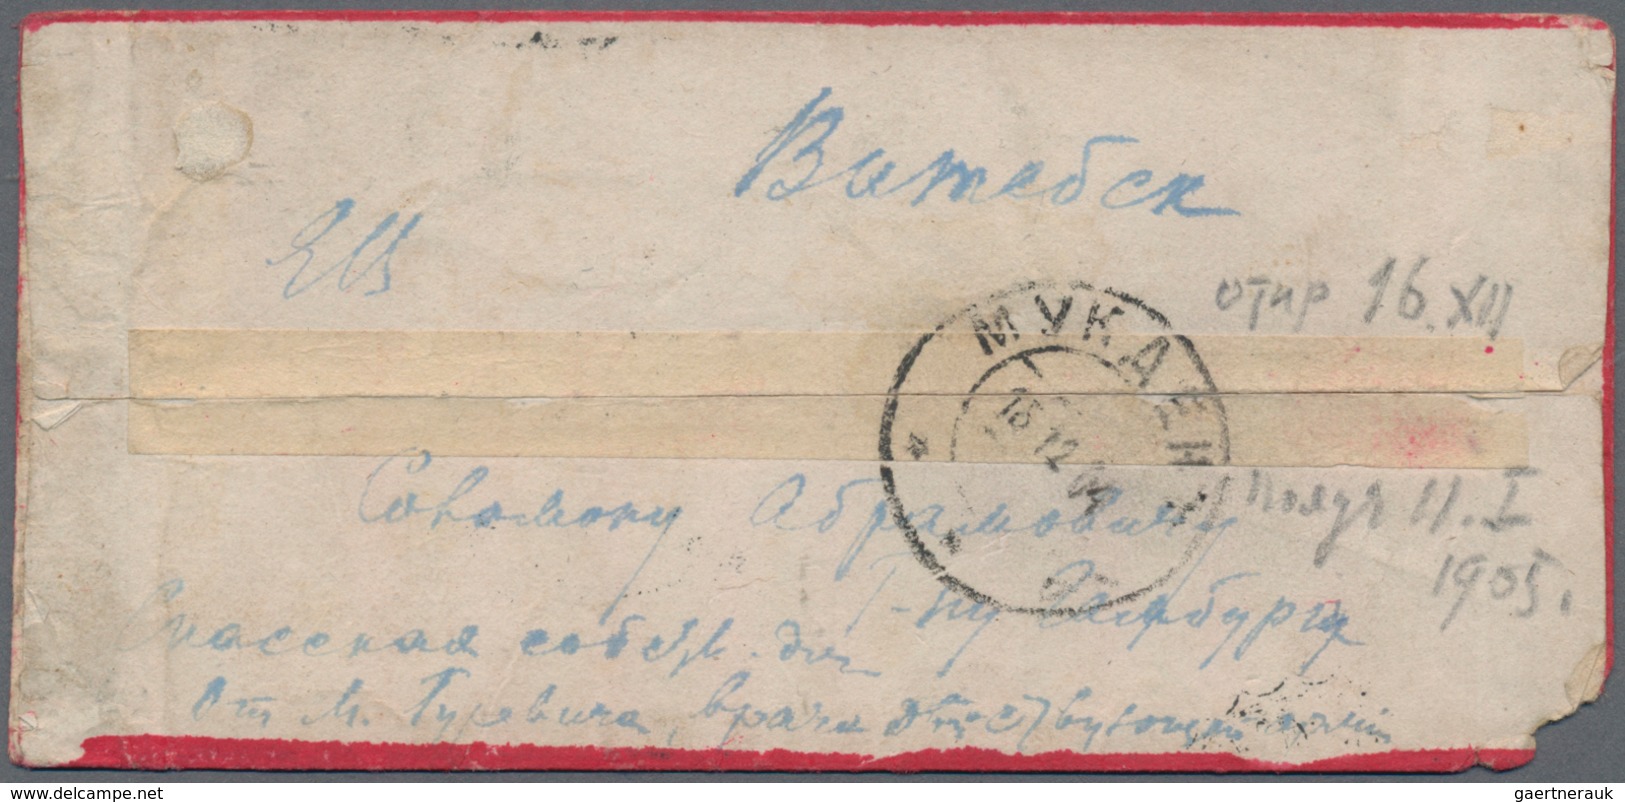 Russische Post In China: 15.12.1904 Russo-Japanese War Decorative Chinese Envelope Used As Cover Fro - China